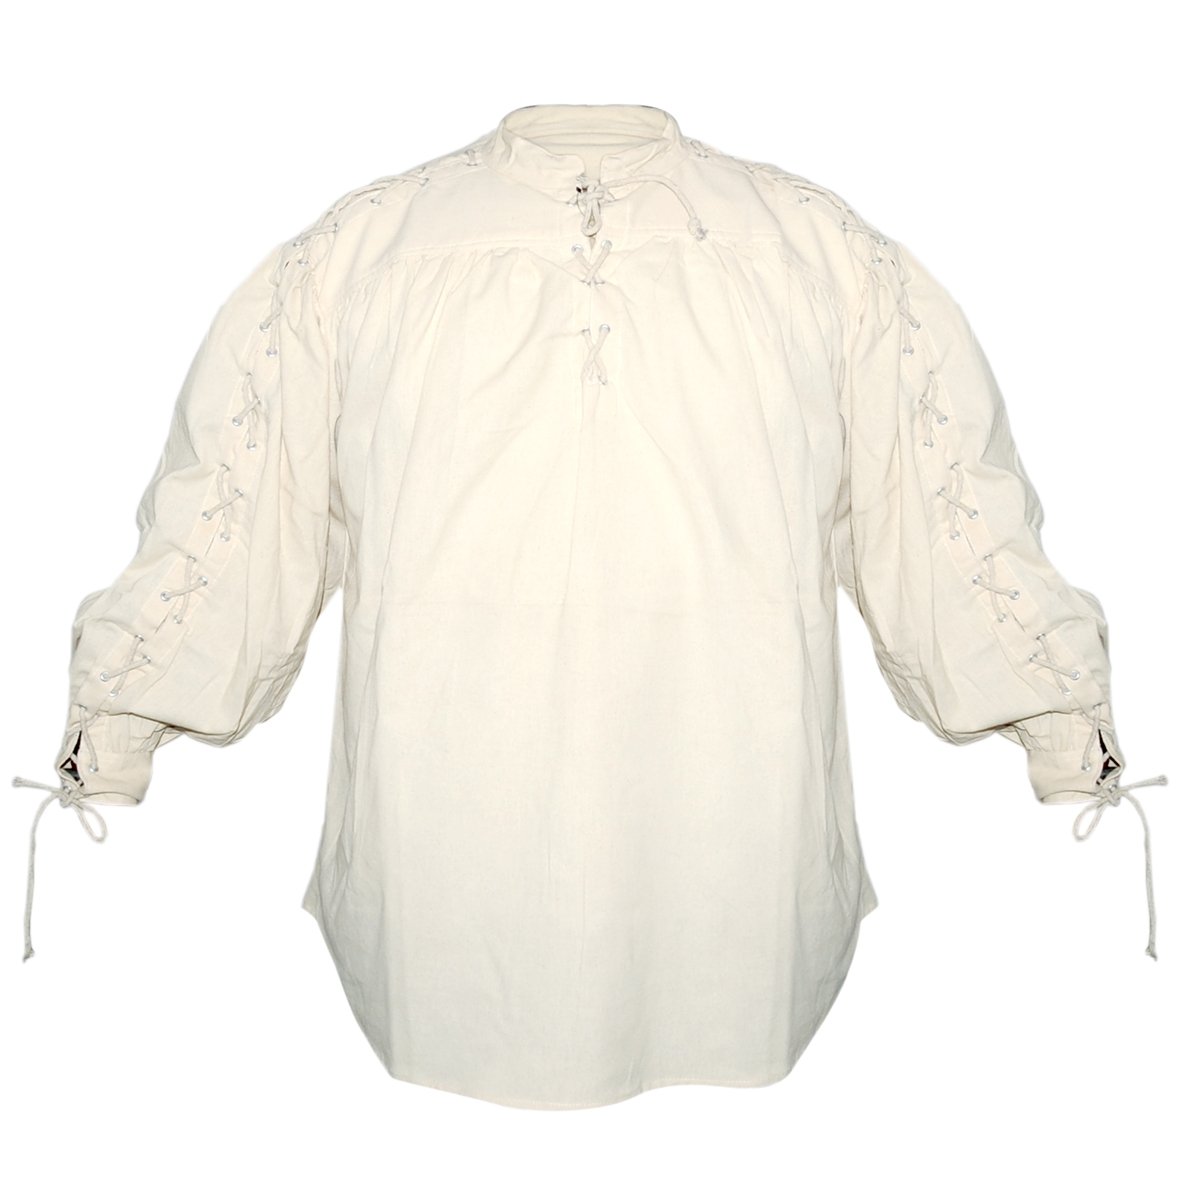 Collarless cotton shirt (laced neck & sleeves) - natural color, Size XL